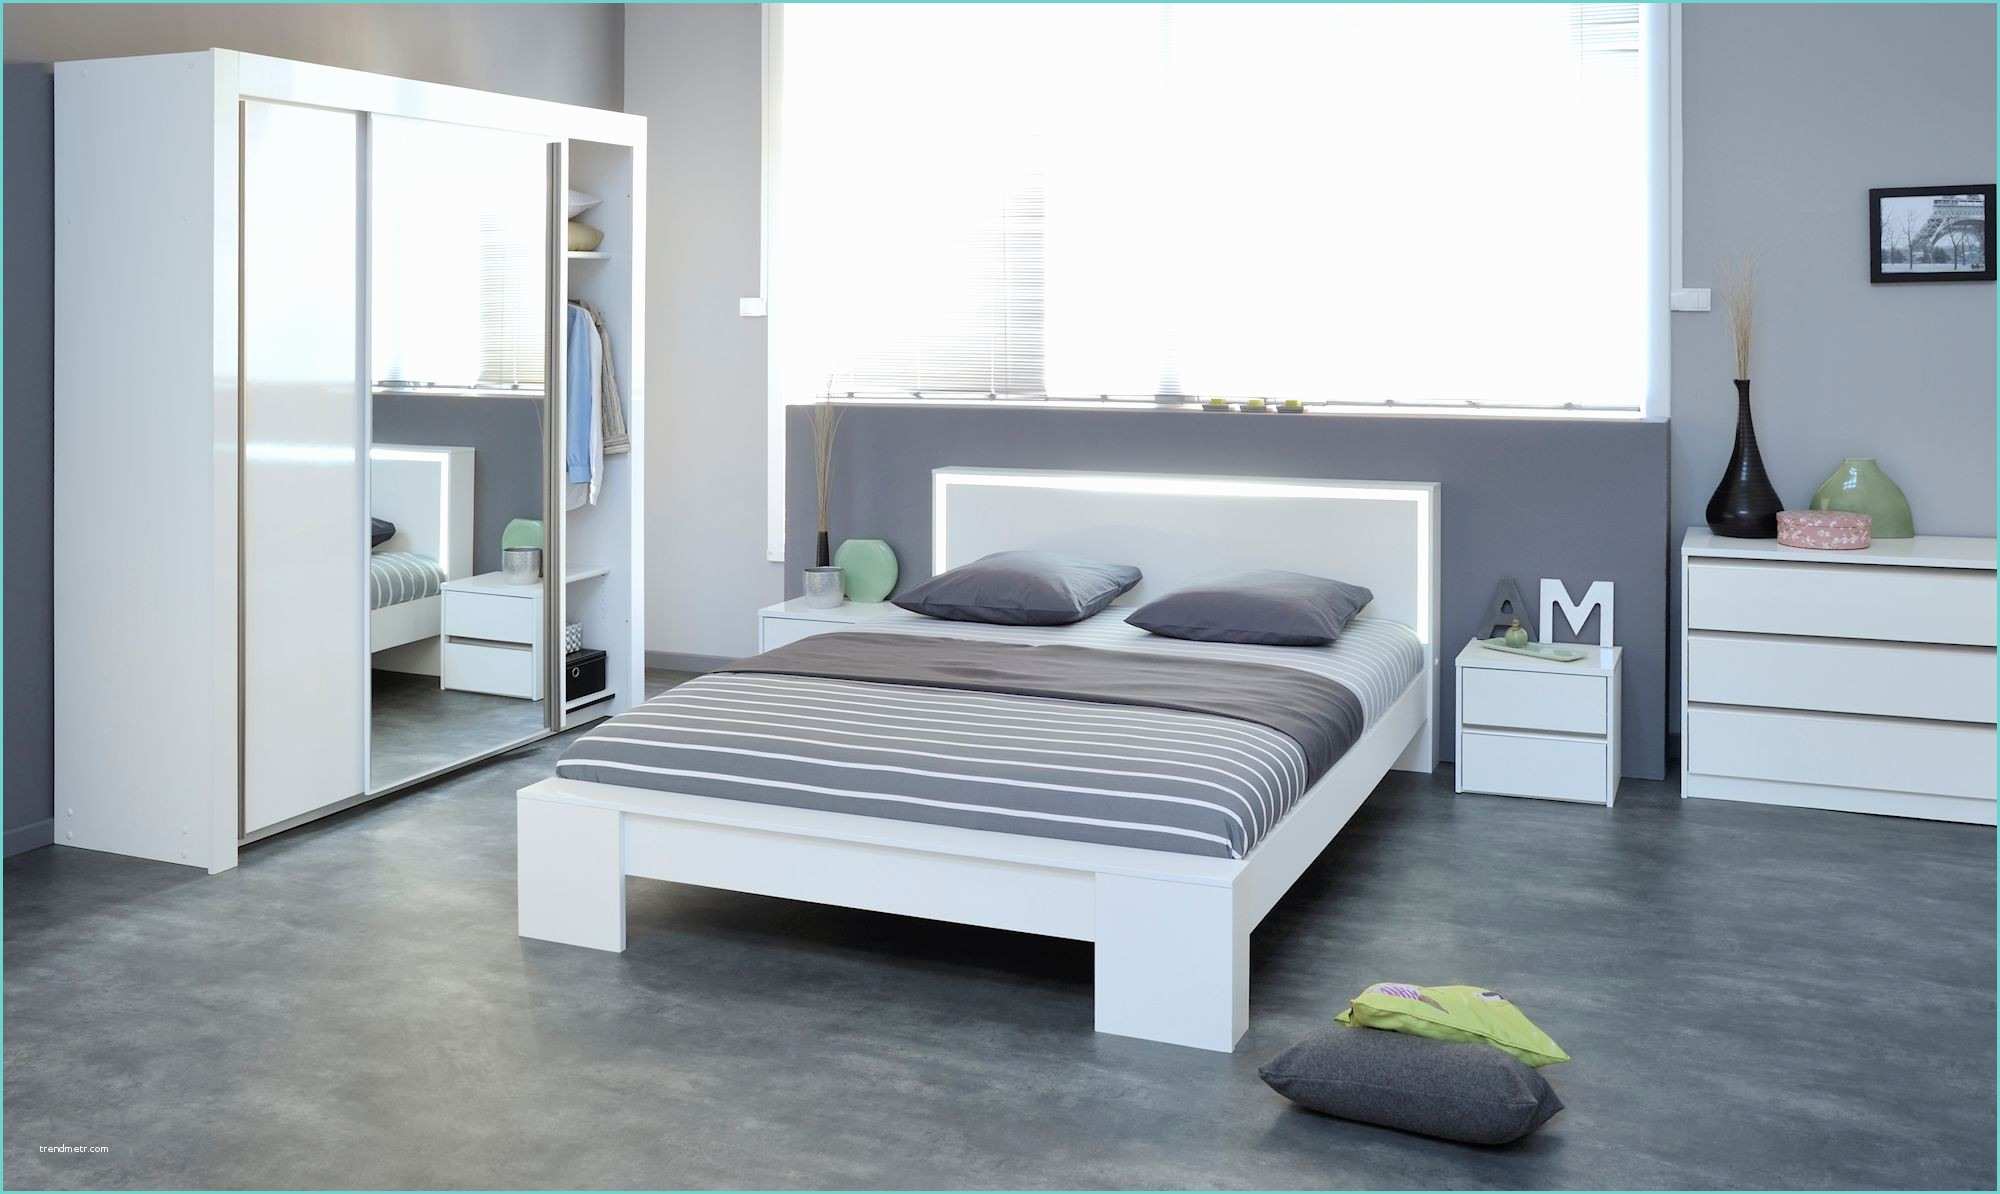 Chambres Coucher 2018 Chambre Ikea Adulte Finest Idees D Chambre Chambre Adulte